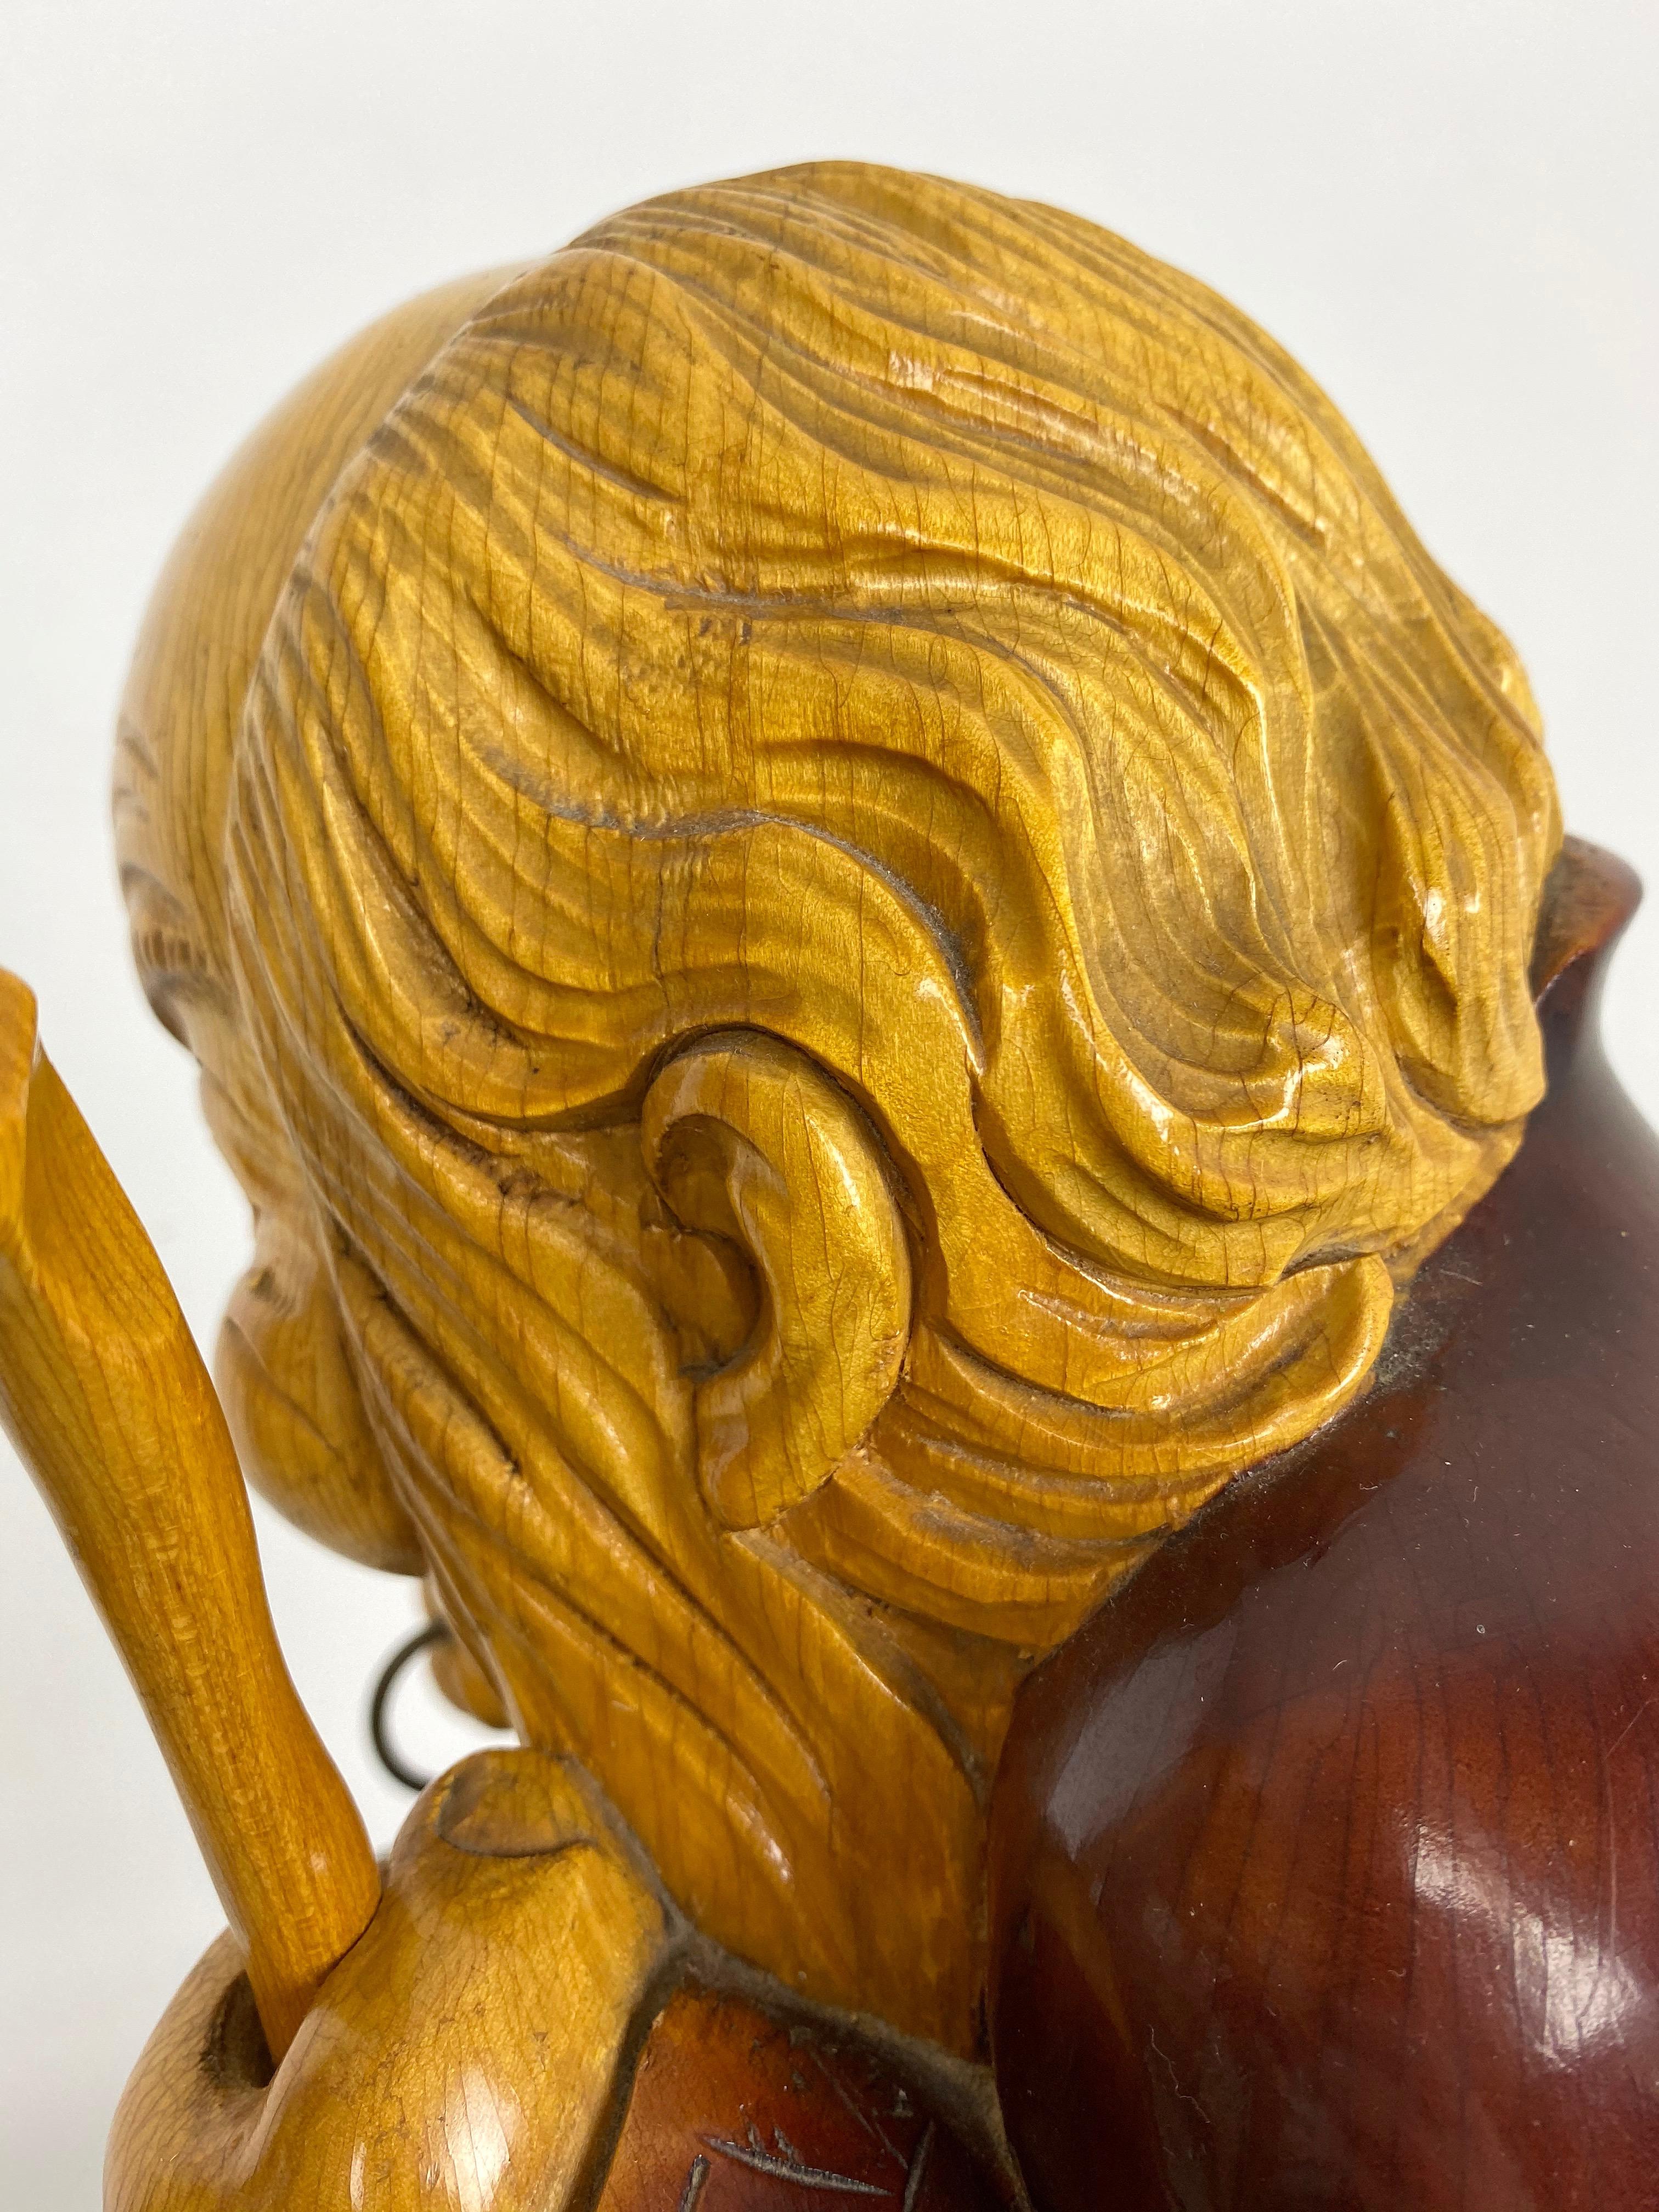 Hand Carved Wood Monk Table Lamp by Aldo Tura for Macabo, Italy, 1950s For Sale 3